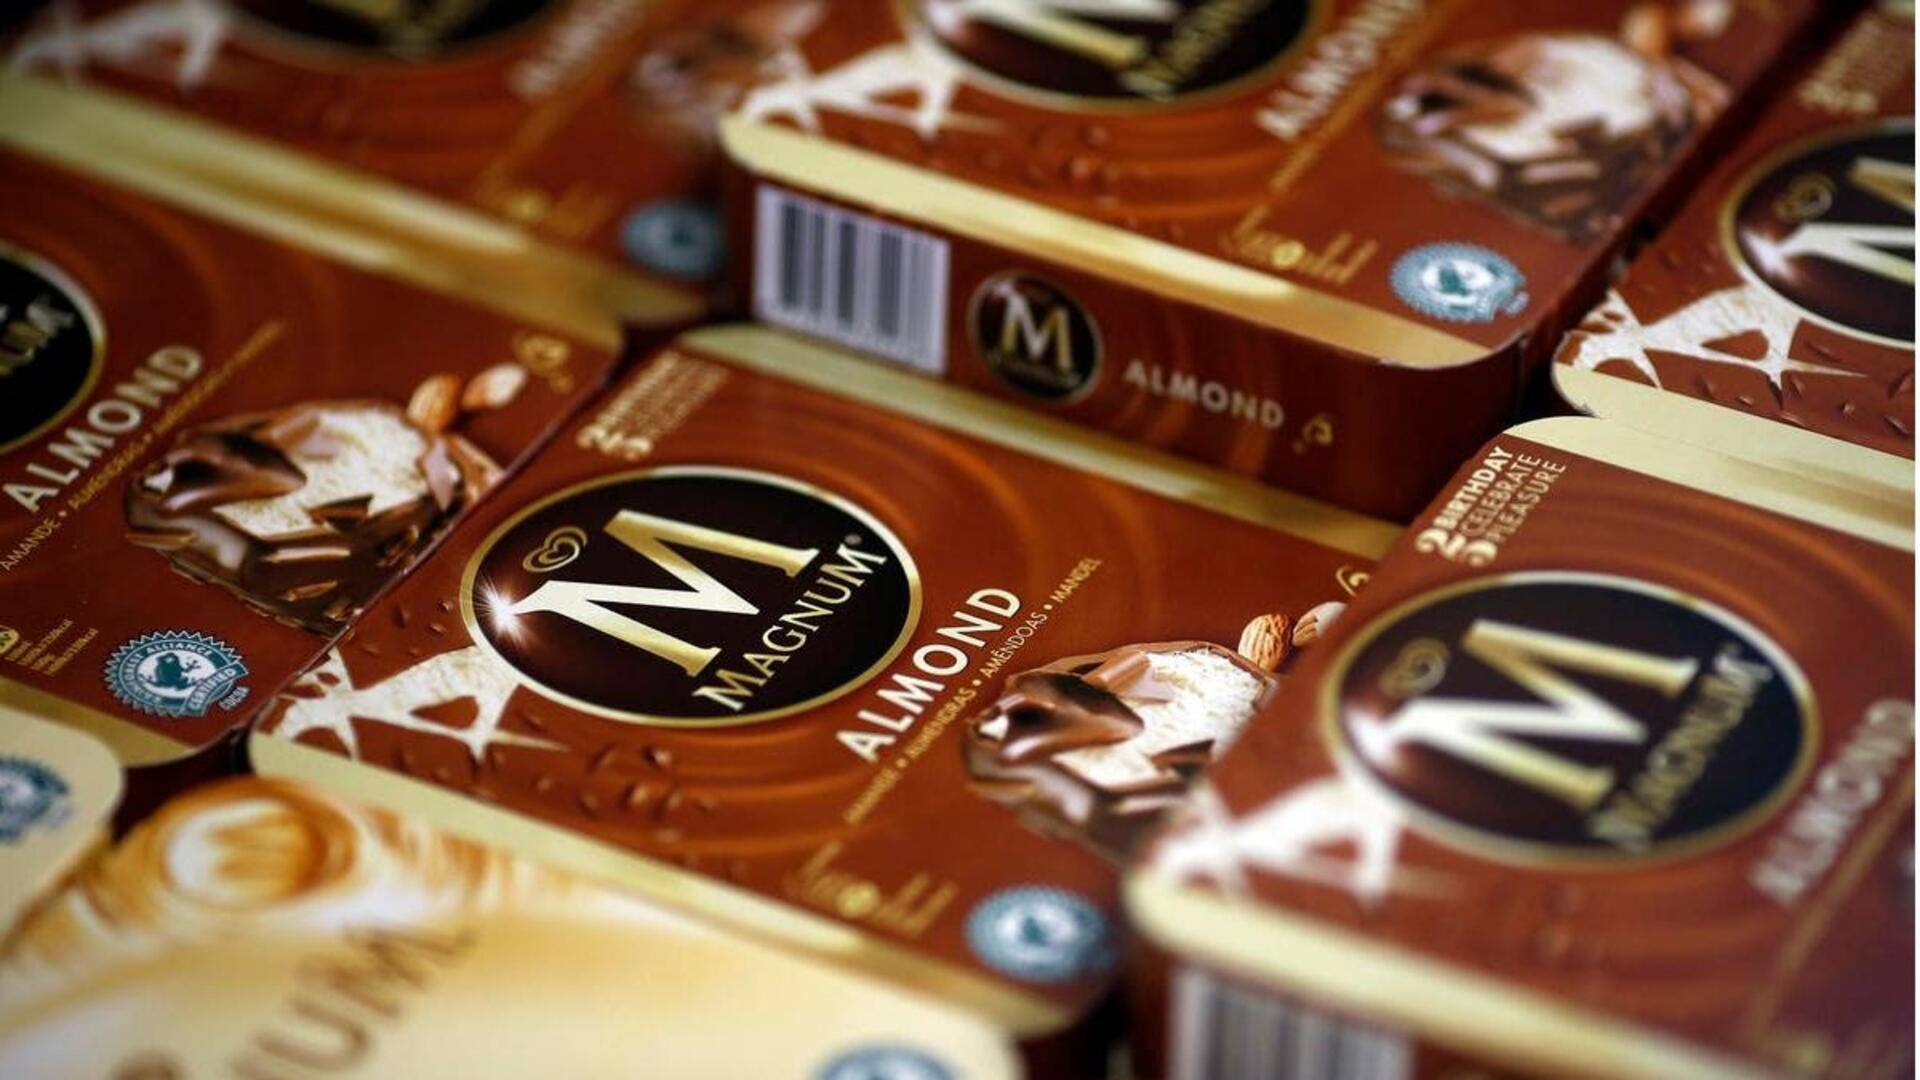 Unilever to separate ice cream business, layoff 7,500 employees